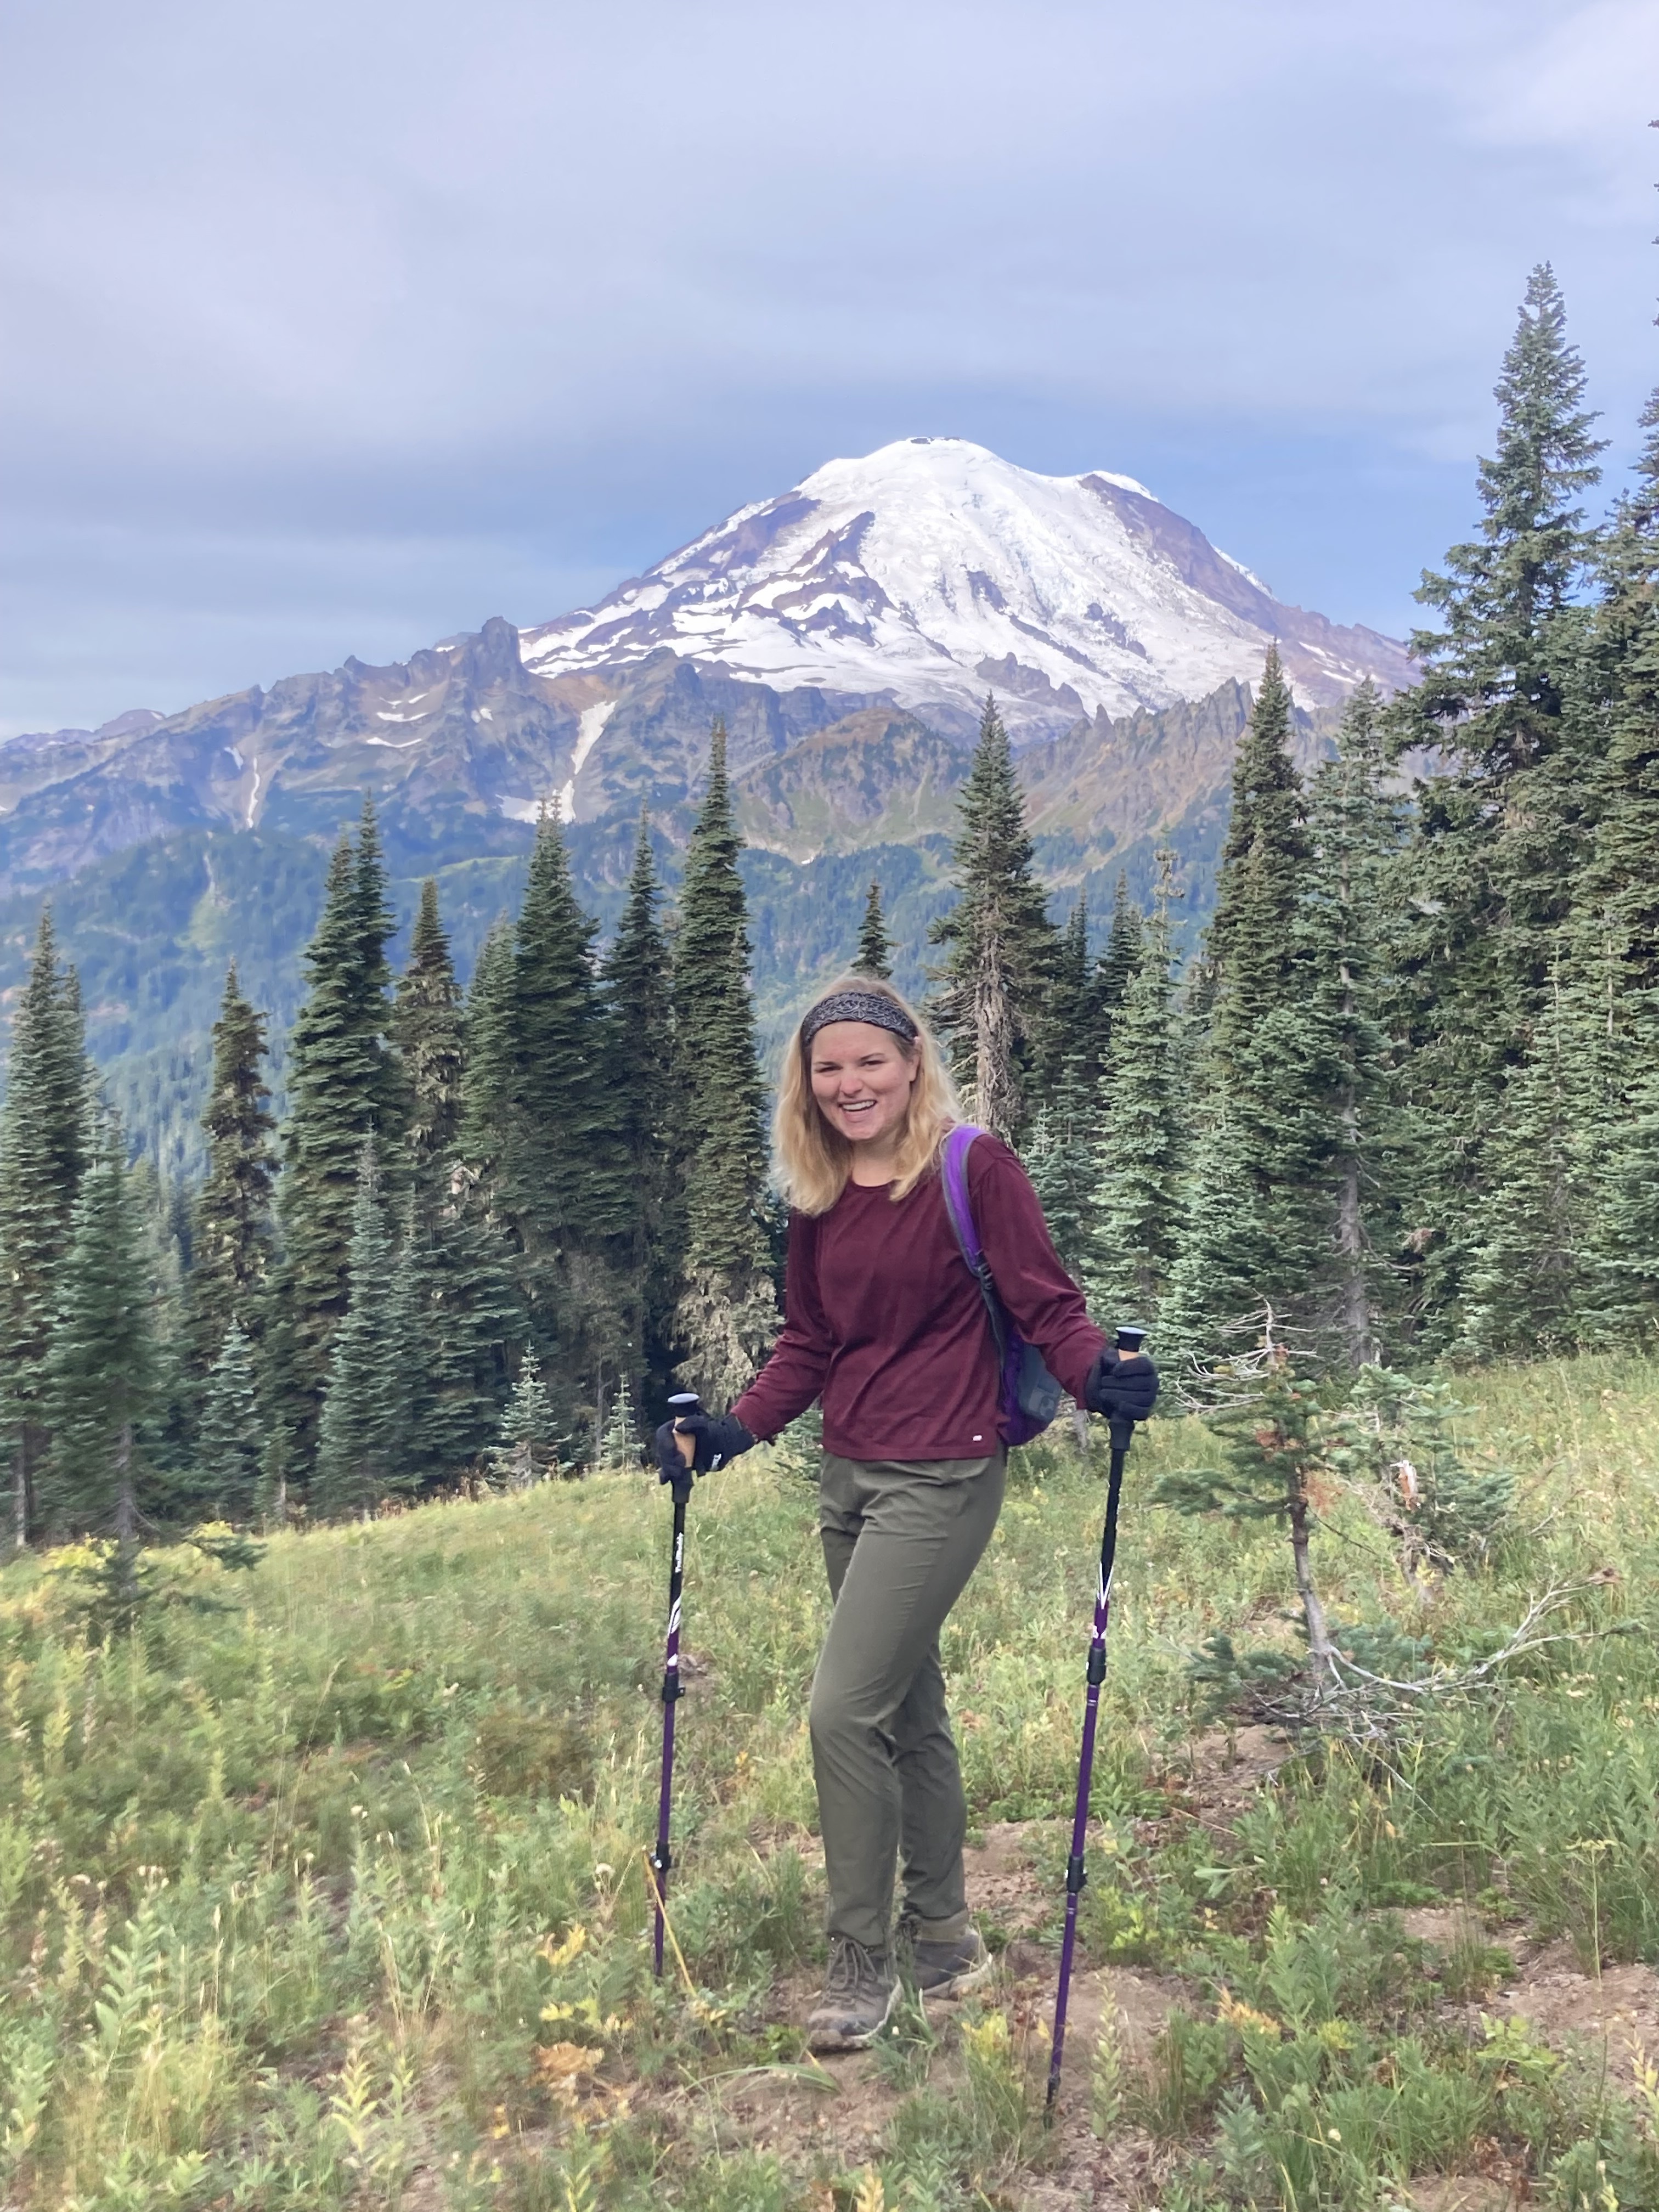 Mia standing holding hiking poles in front of Mt. Rainier.